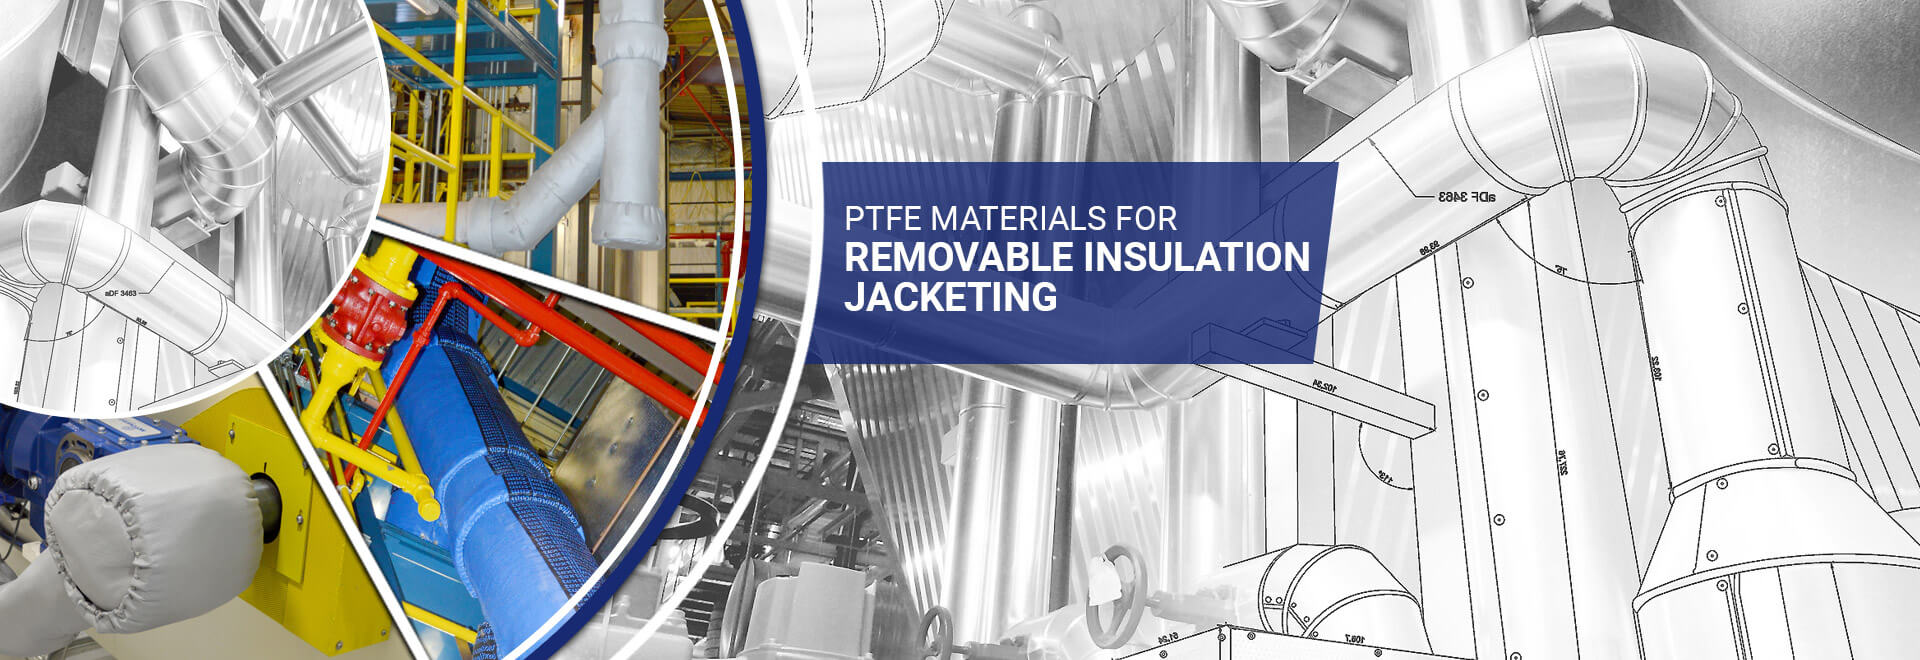 PTFE insulation jacketing materials, removable insulation jacketing materials, teflon insulation jacketing, removeable insulation cover, insulation industrial, removeable insulation pad material